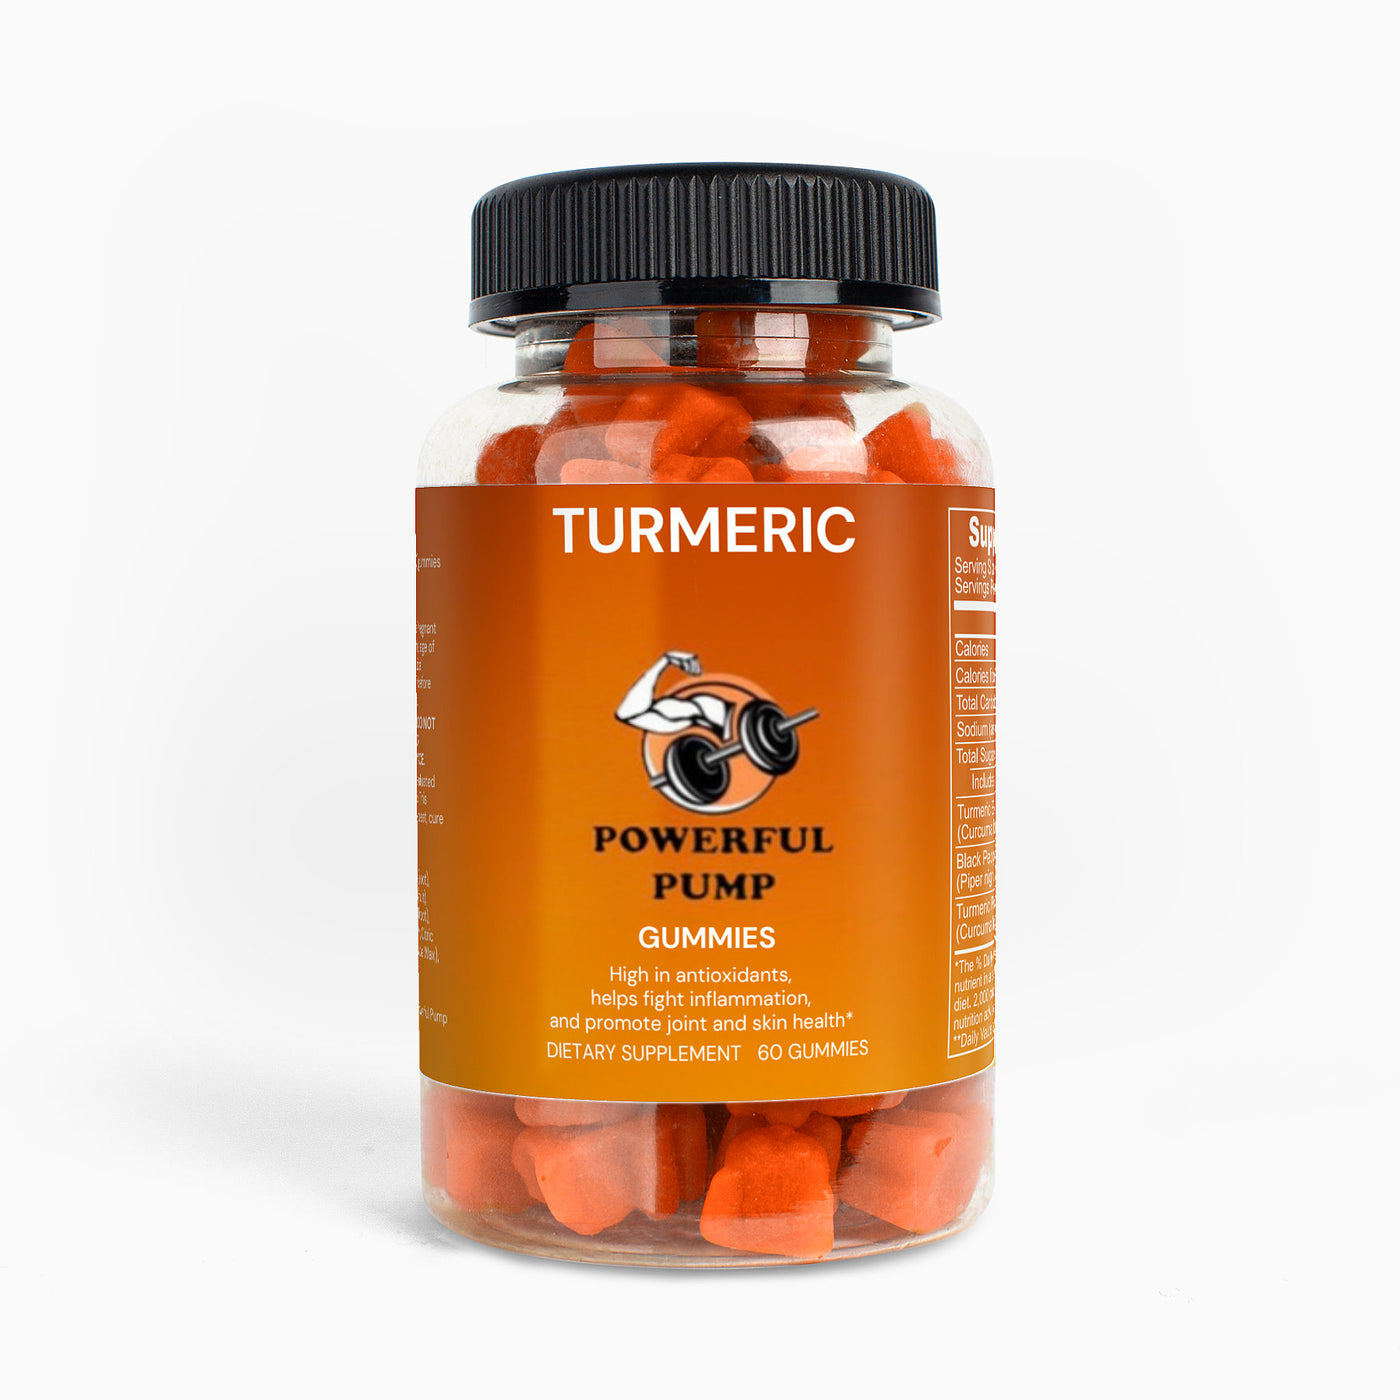 A photo of Turmeric Gummies - Yellow gummy supplements infused with turmeric, known for their anti-inflammatory properties and support for overall health and wellness.